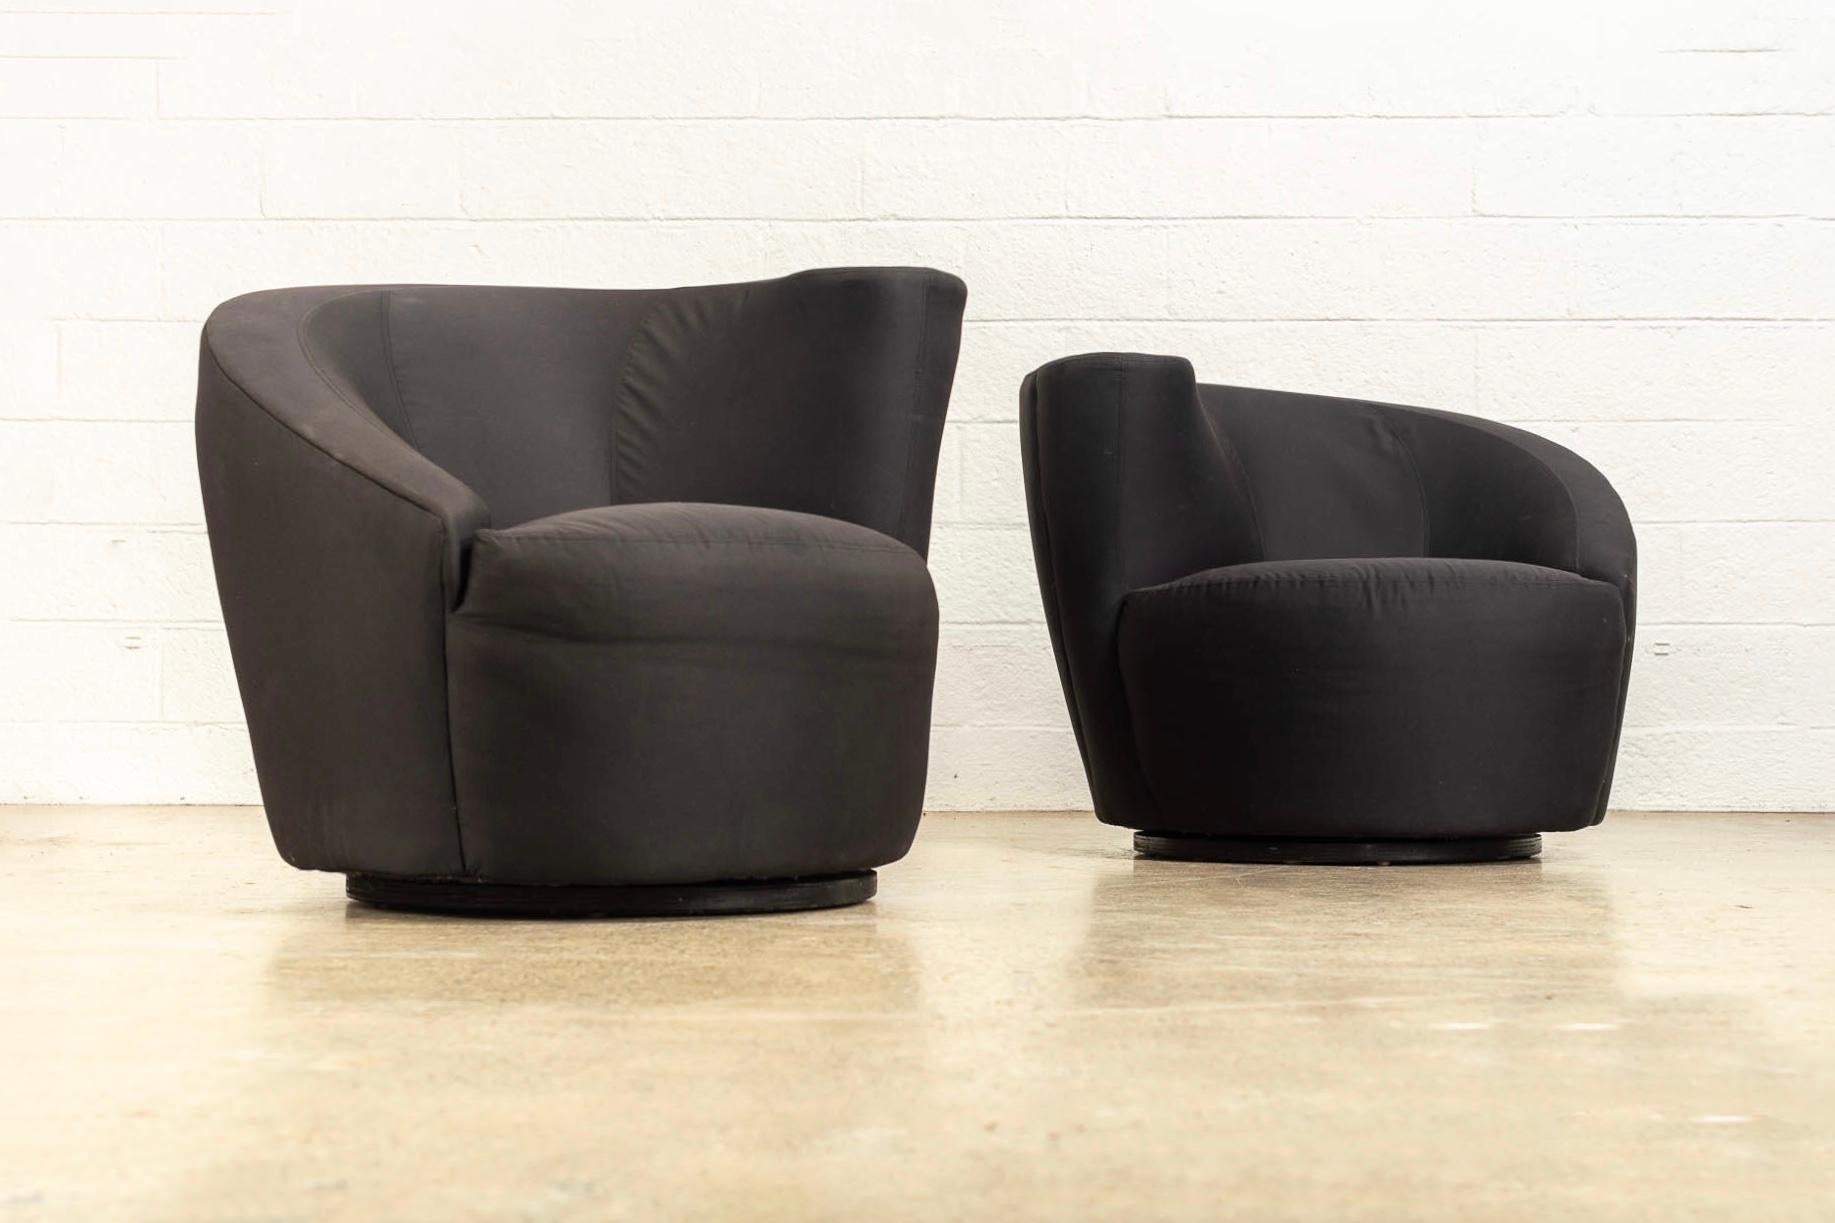 This pair of vintage Mid-Century Modern “Nautilus” club lounge chairs designed by Vladimir Kagan for Directional are circa 1970. The iconic design features classic Kagan style with distinctive curves and elegant organic lines. Upholstered in a black